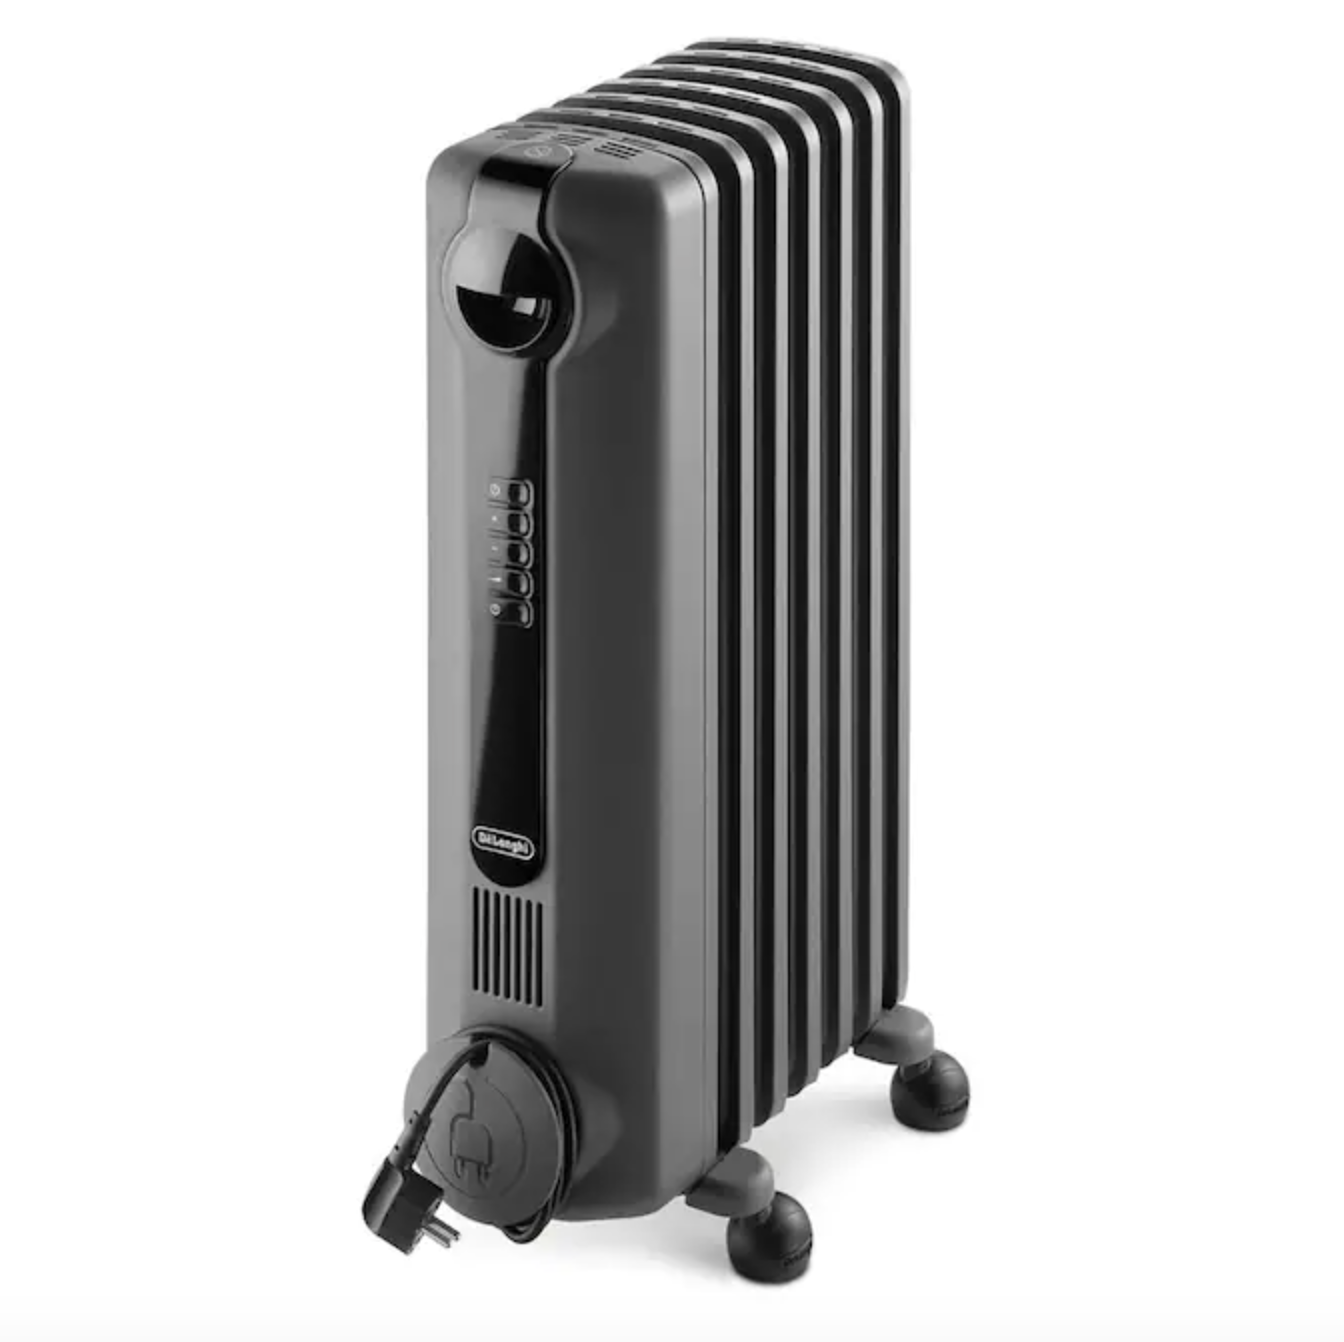 Oil-Filled Radiant Compact Personal Electric Space Heater 